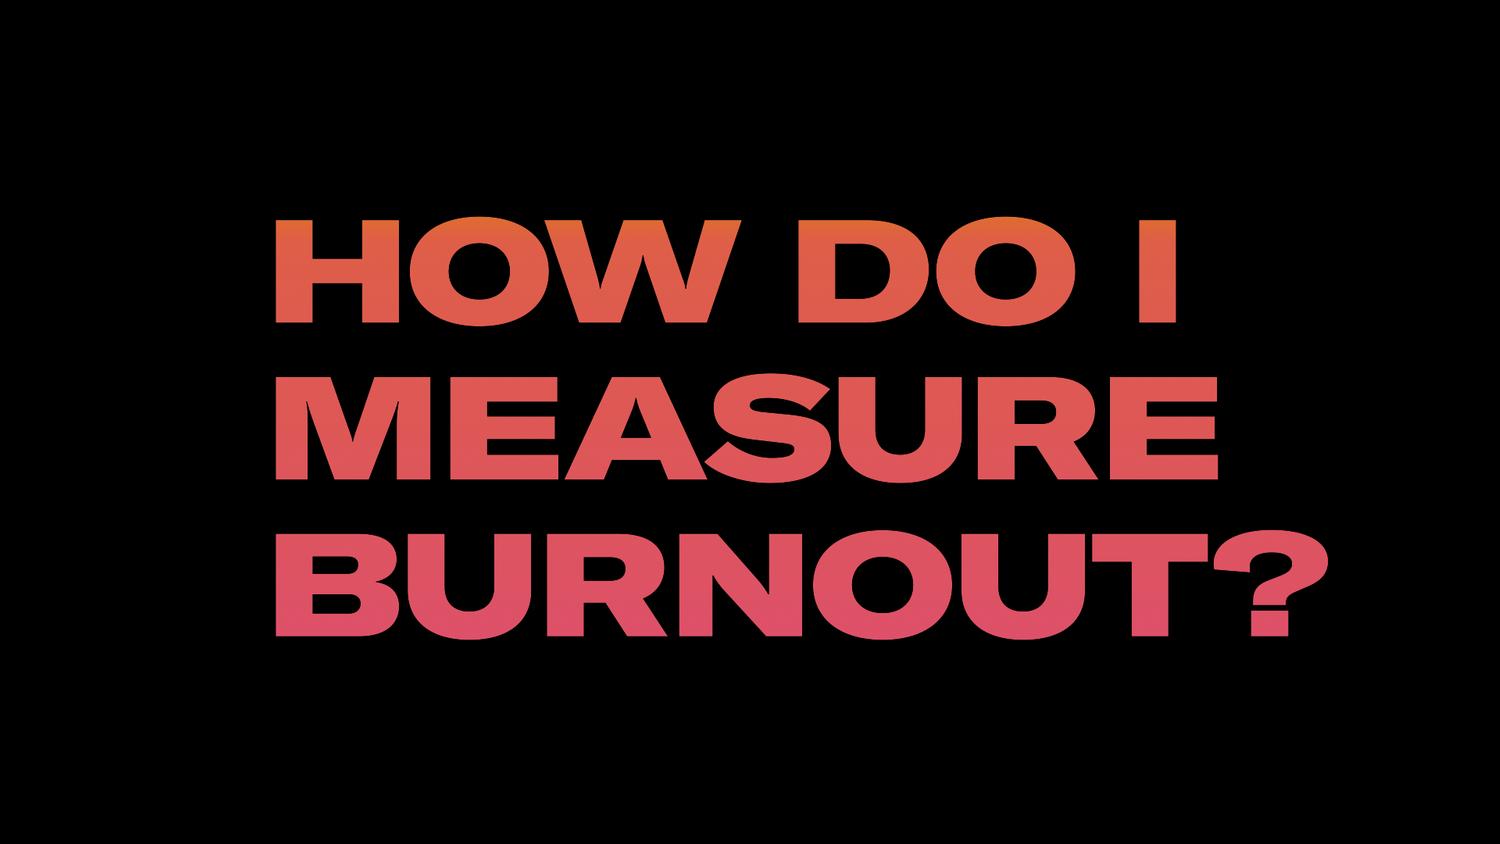 A title slide with 'How do I Measure Burnout?'